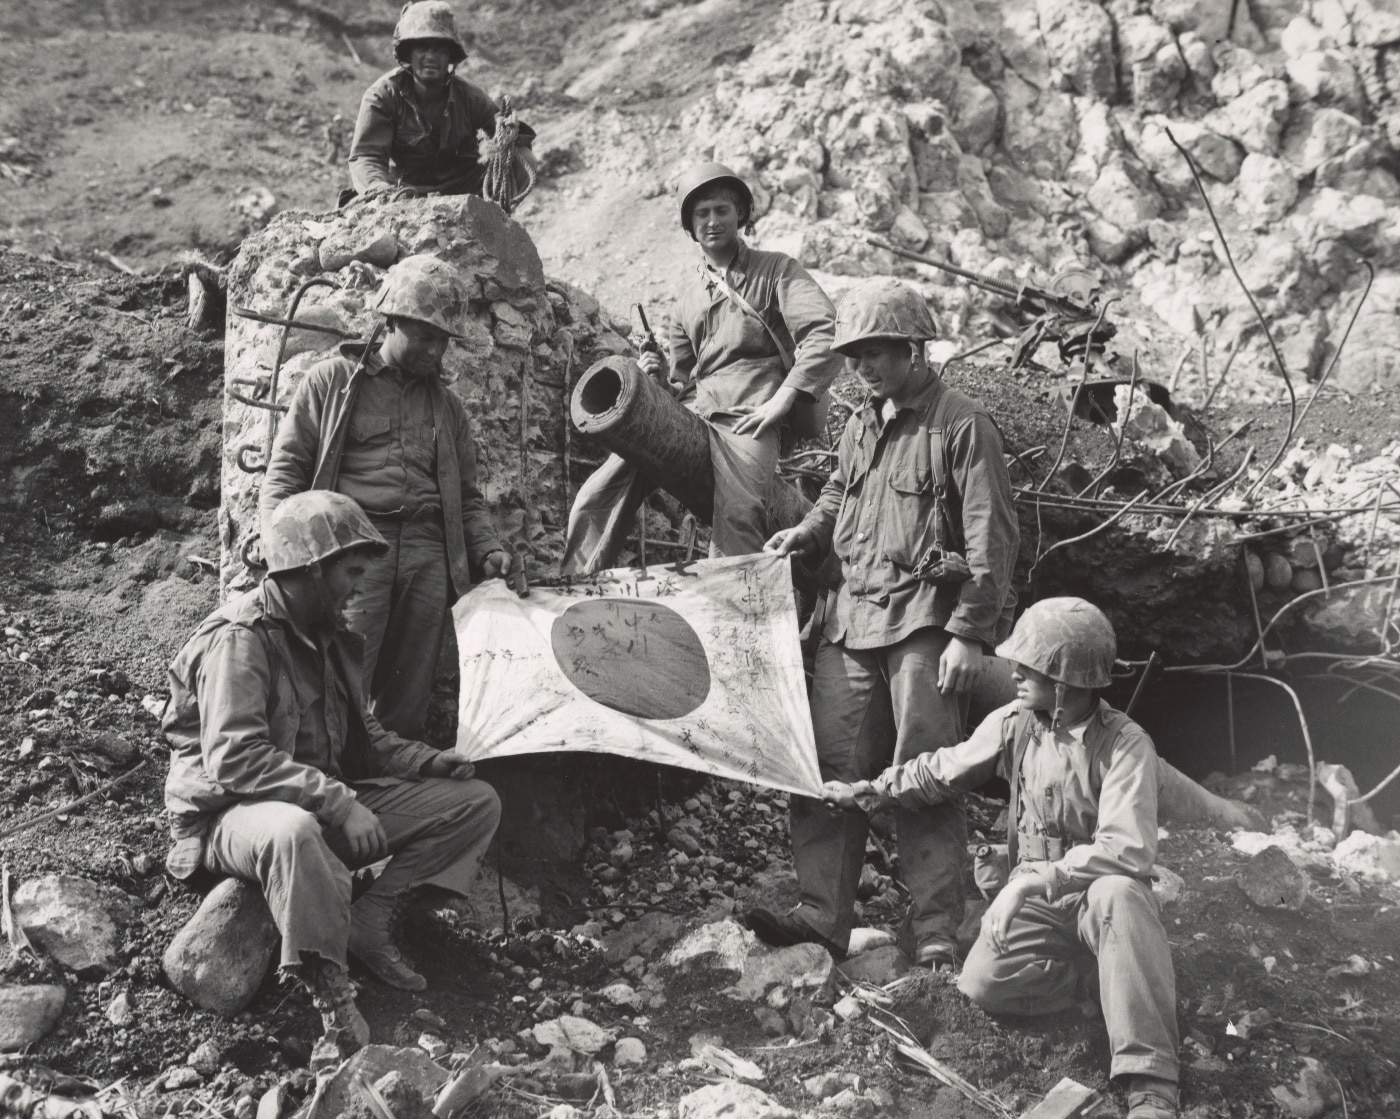 Marines of the 5th Marine Division with a captured Japanese flag on Iwo Jima. Image: Staff Sgt. M.A. Cornelius/U.S. Marine Corps